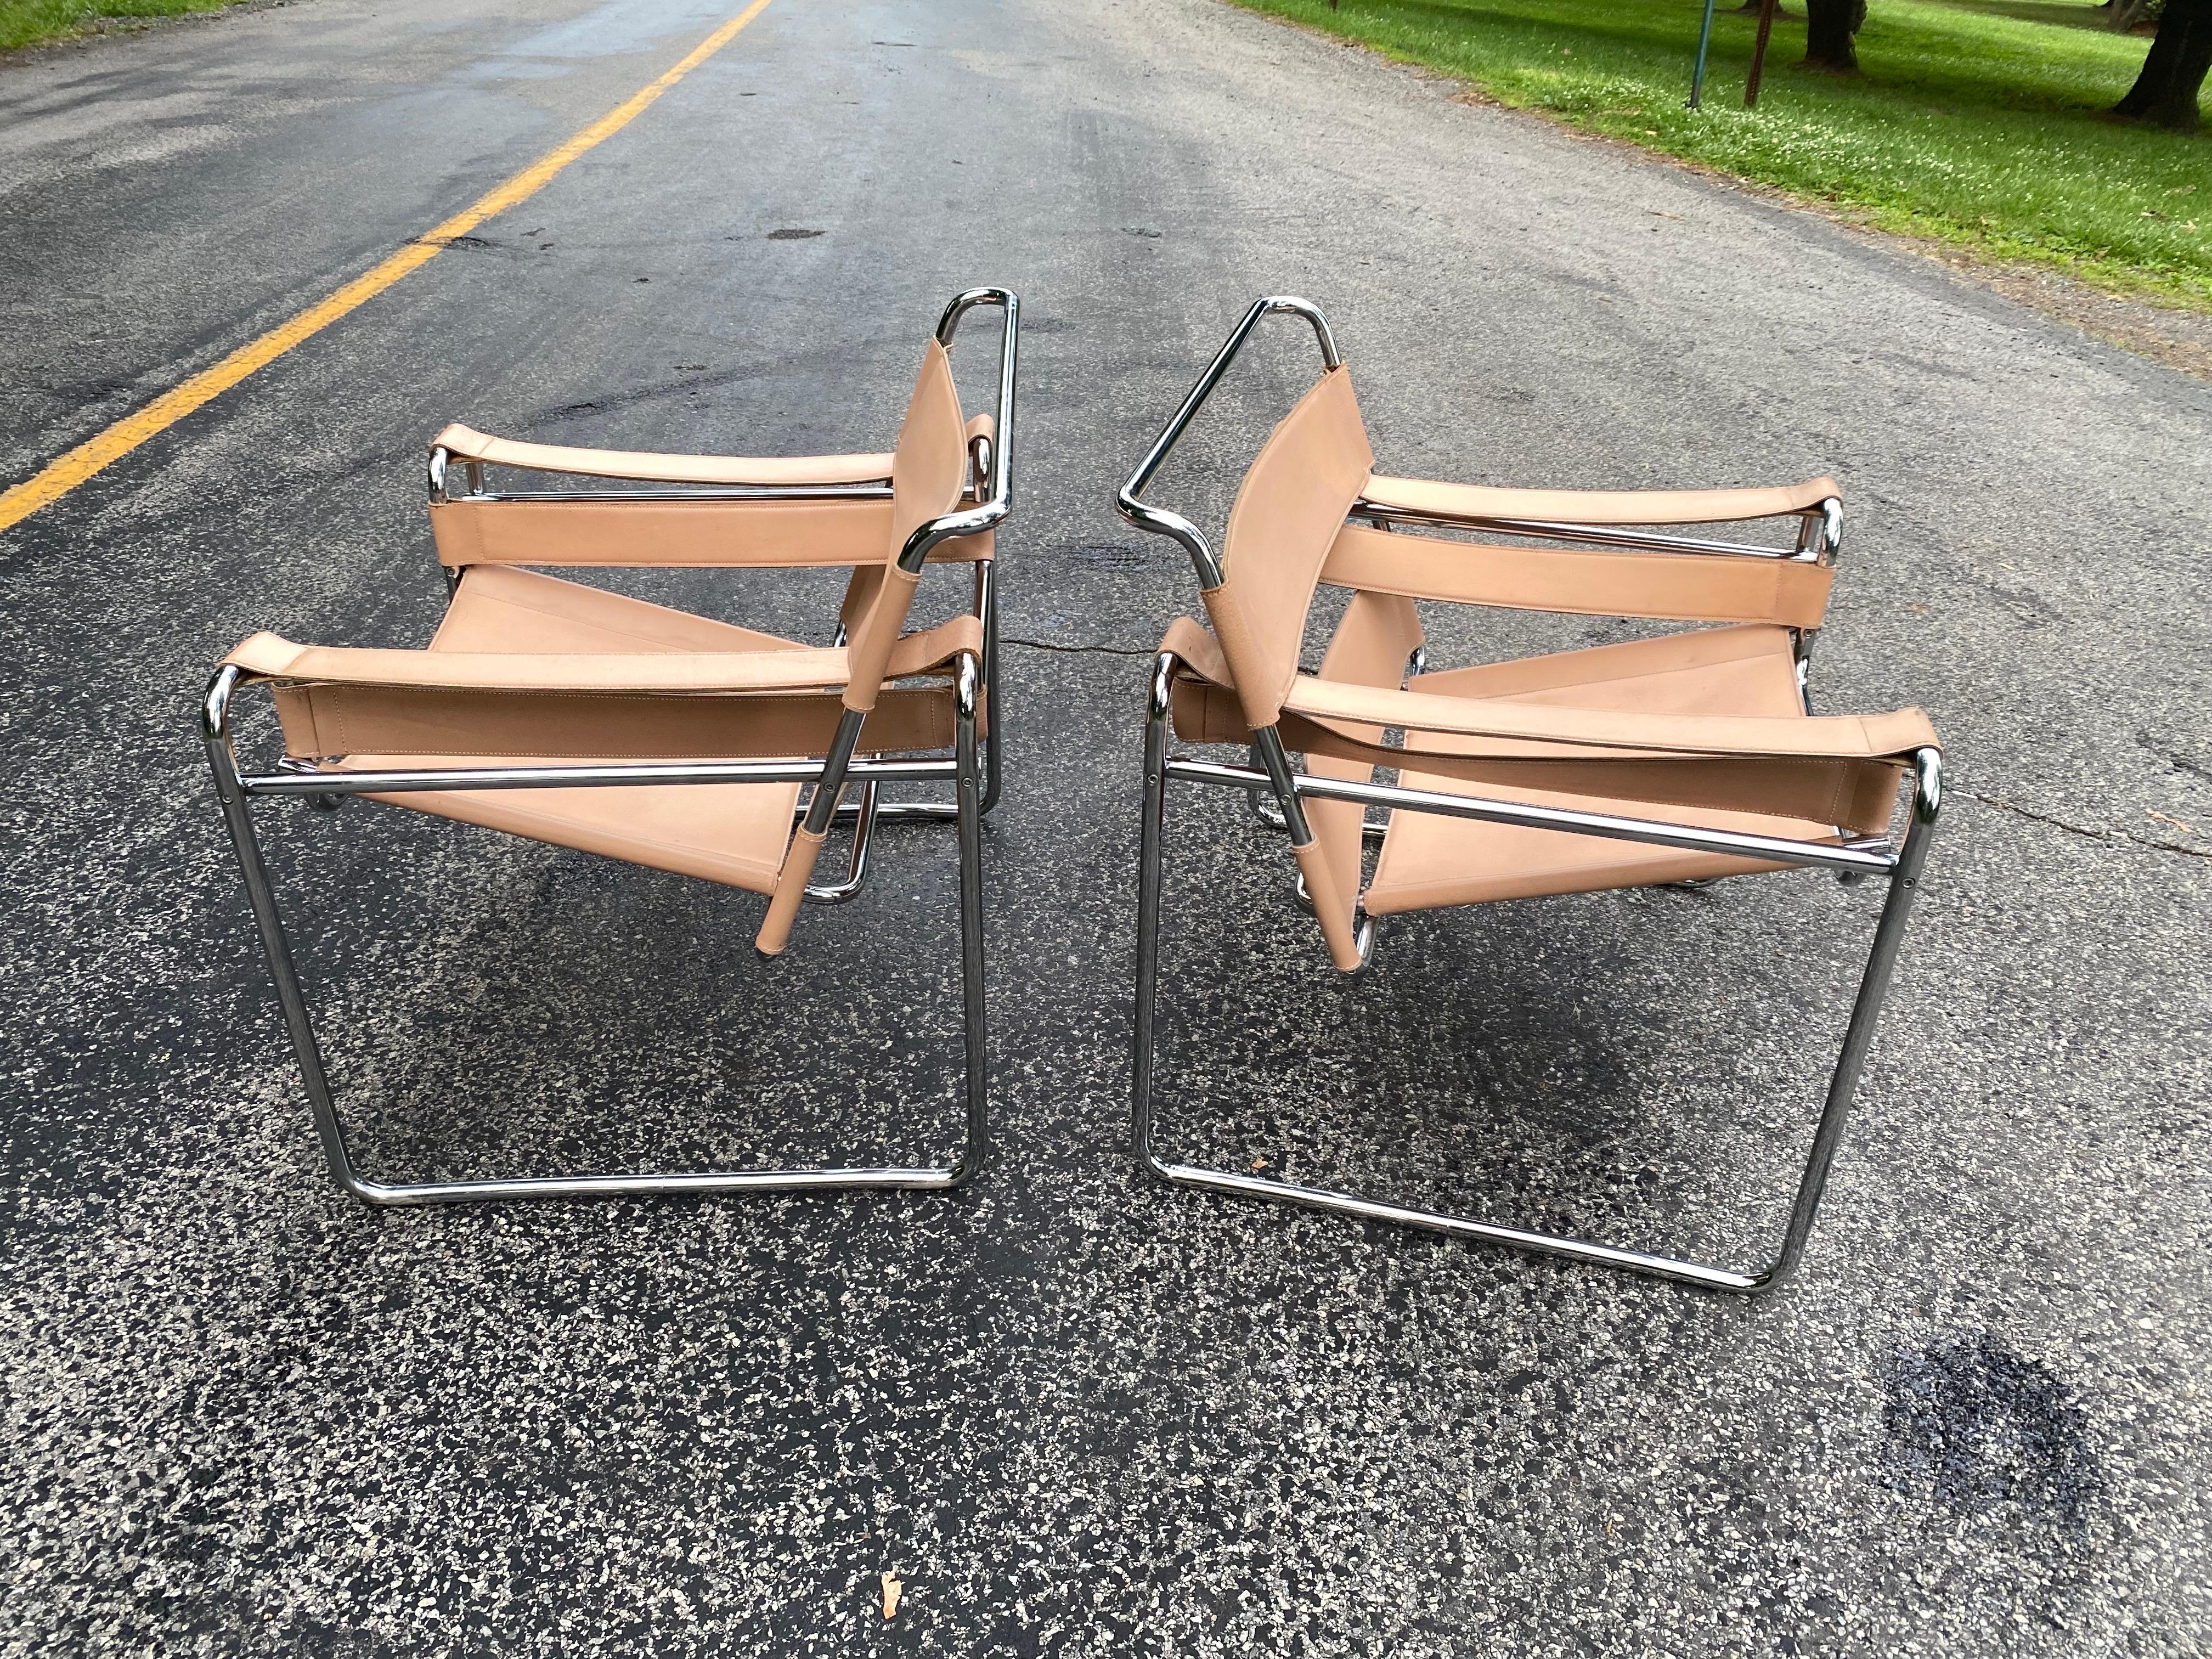 Pair of Marcel Breuer Wassily chairs in a creamy colored leather. Leather shows a nice amount of Patina, as seen in photos. Chrome is very clean! Leather shows wear at armrest areas but all still solid with no missing or loose stitching to leather.